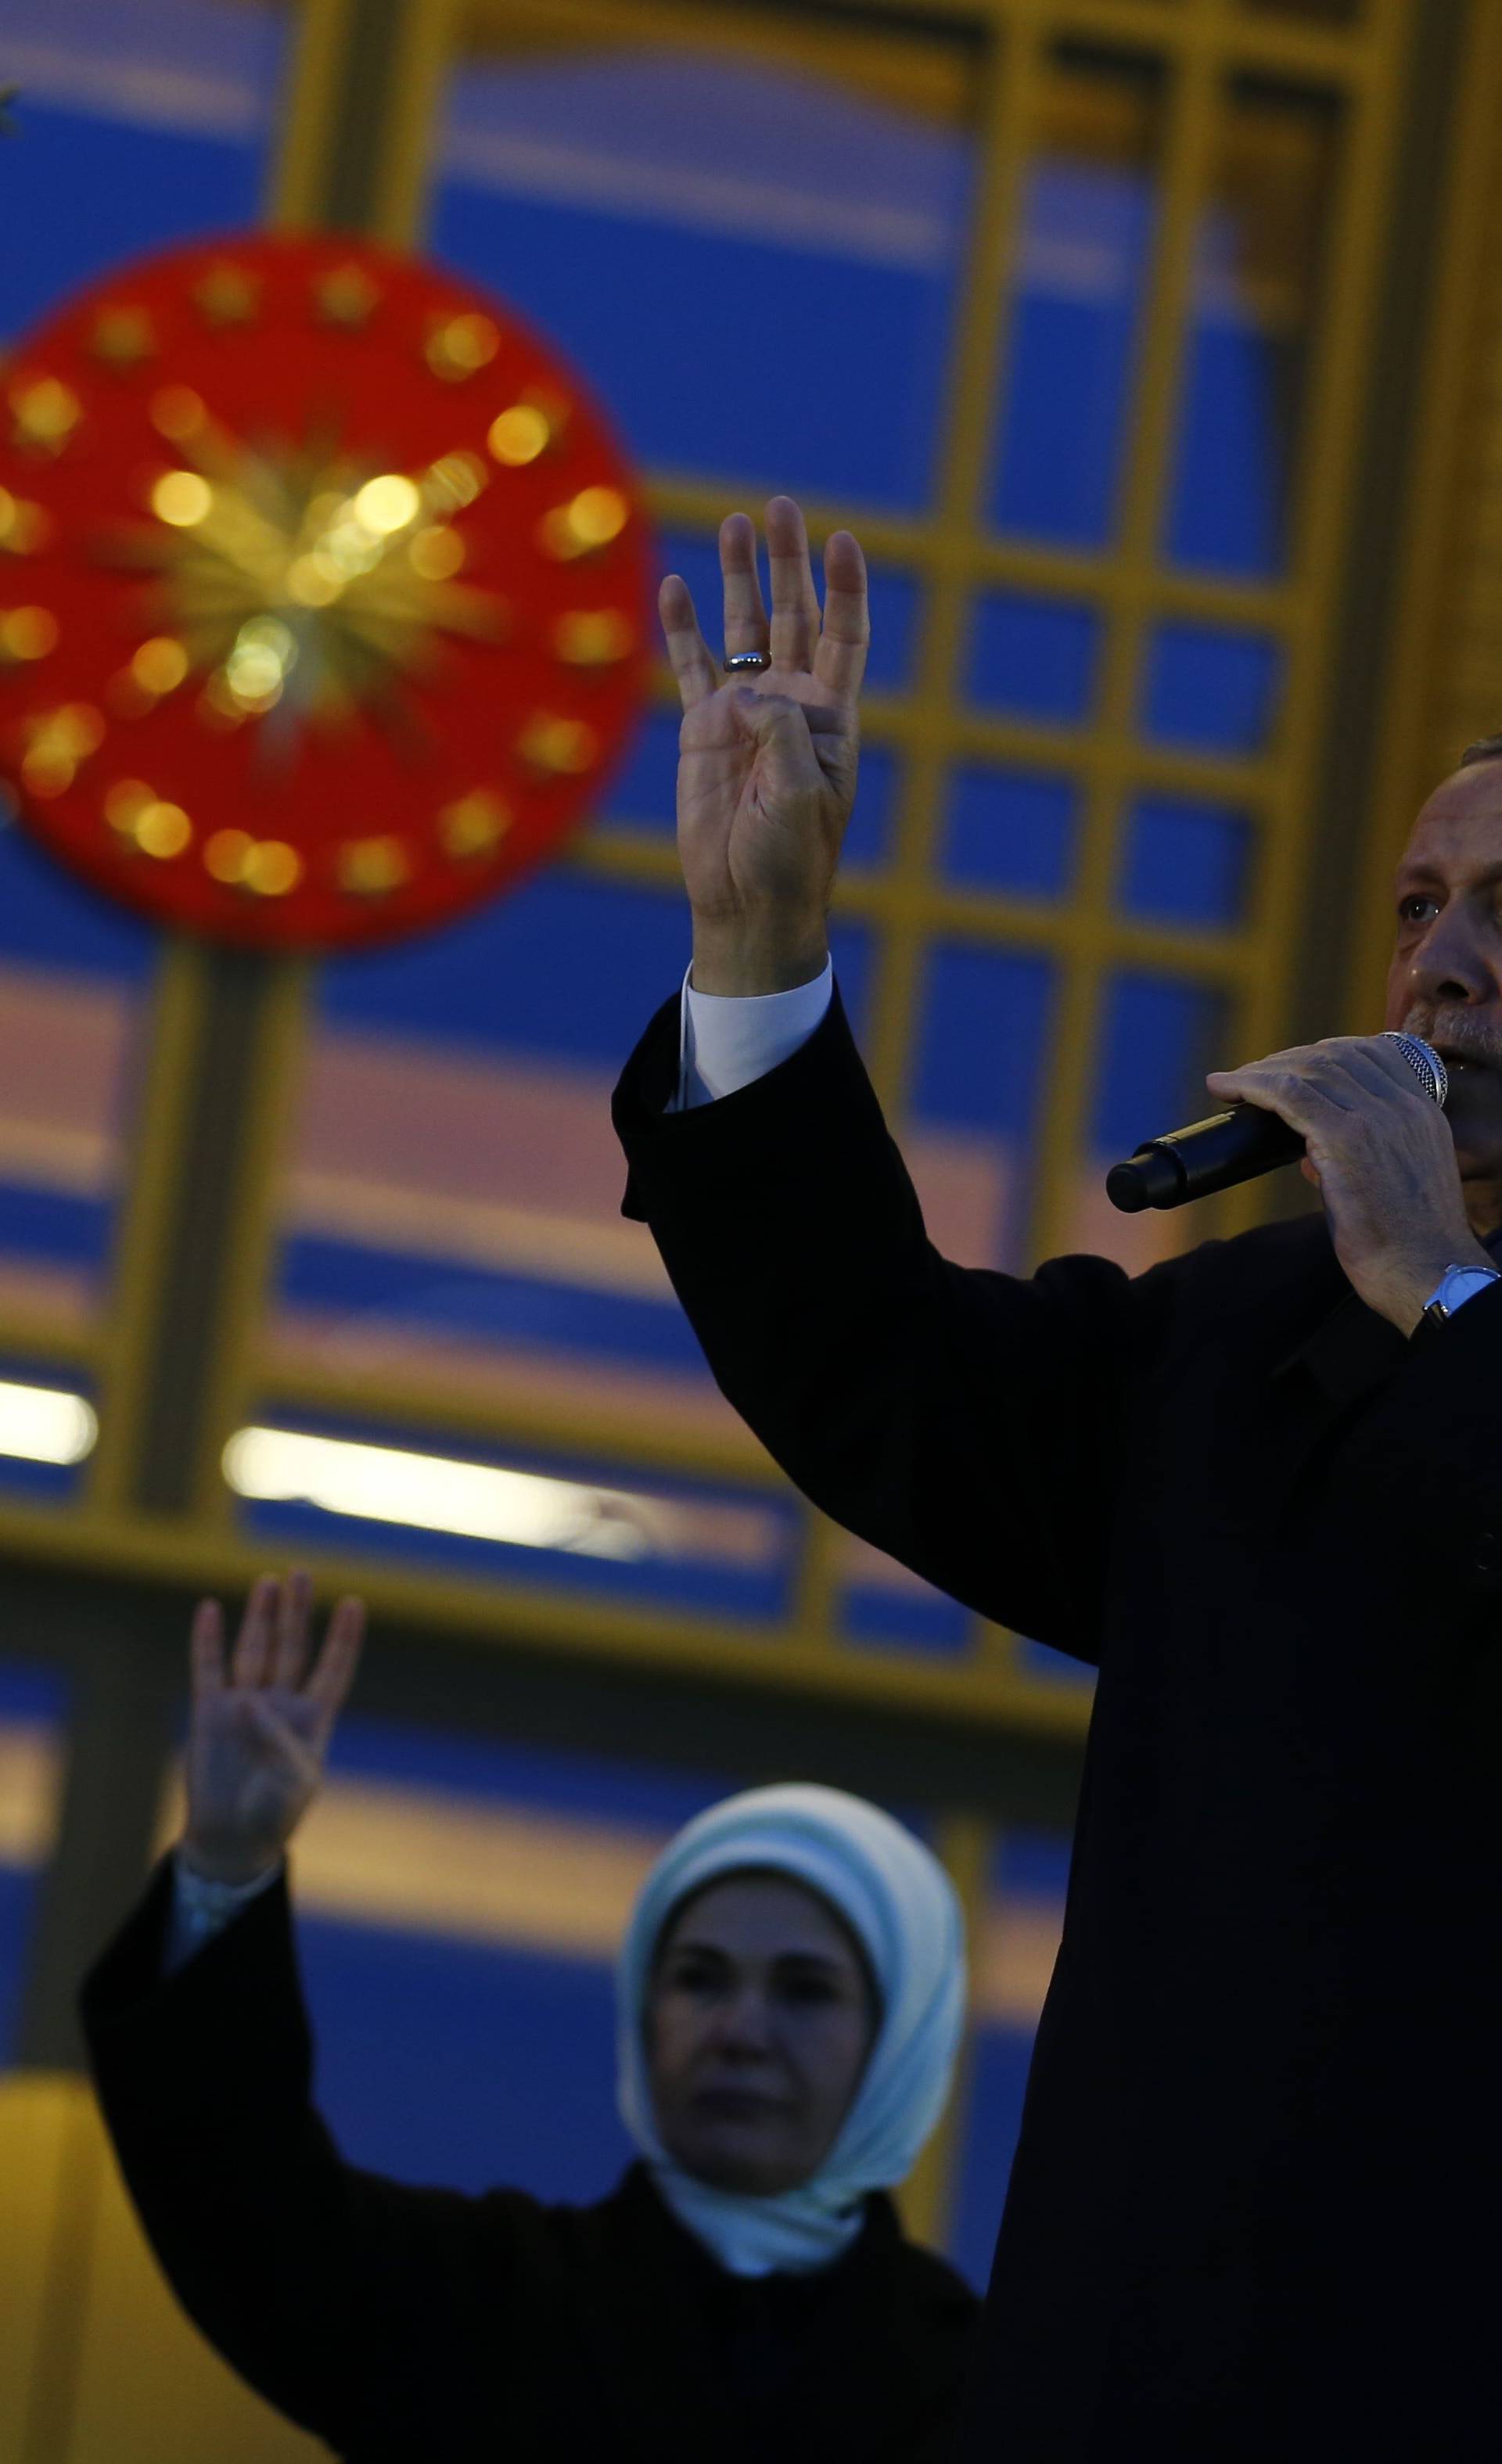 Turkish President Erdogan addresses his supporters at the Presidential Palace in Ankara